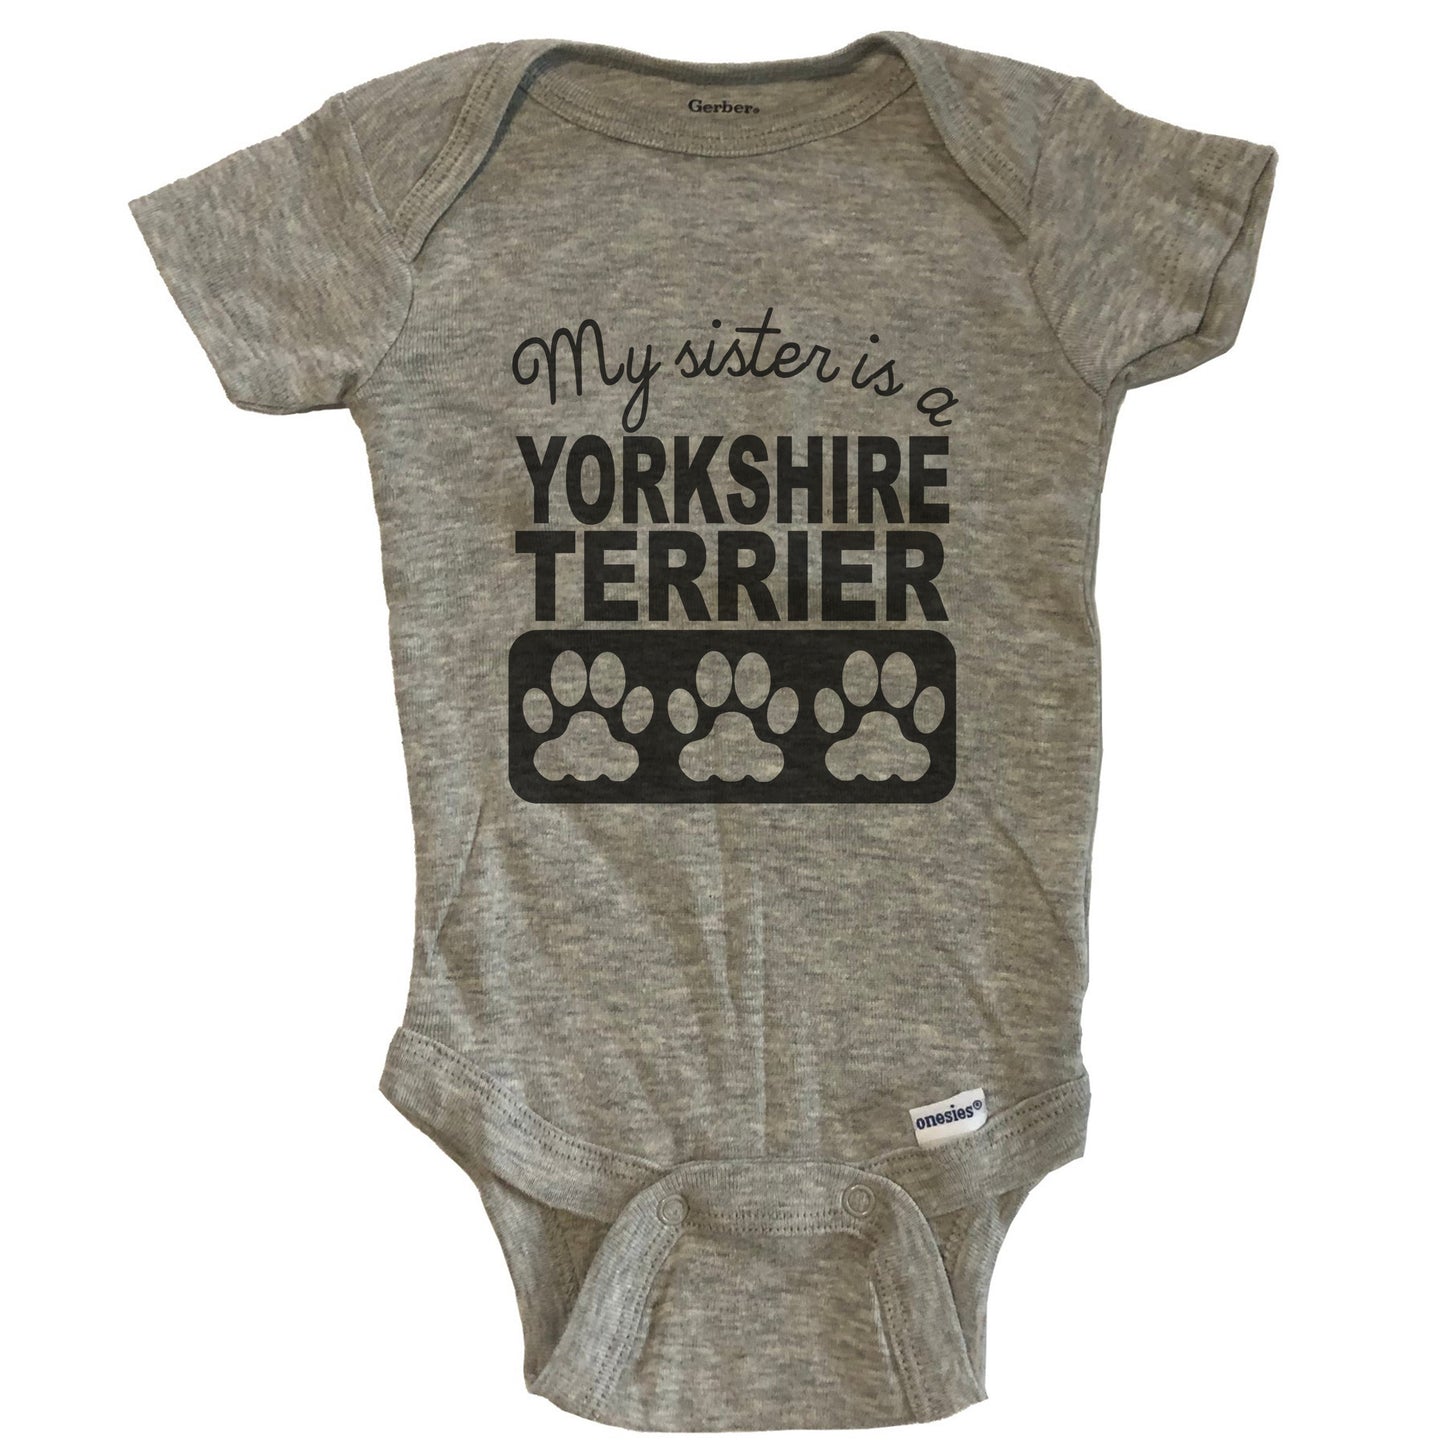 My Sister Is A Yorkshire Terrier Baby Onesie One Piece Baby Bodysuit